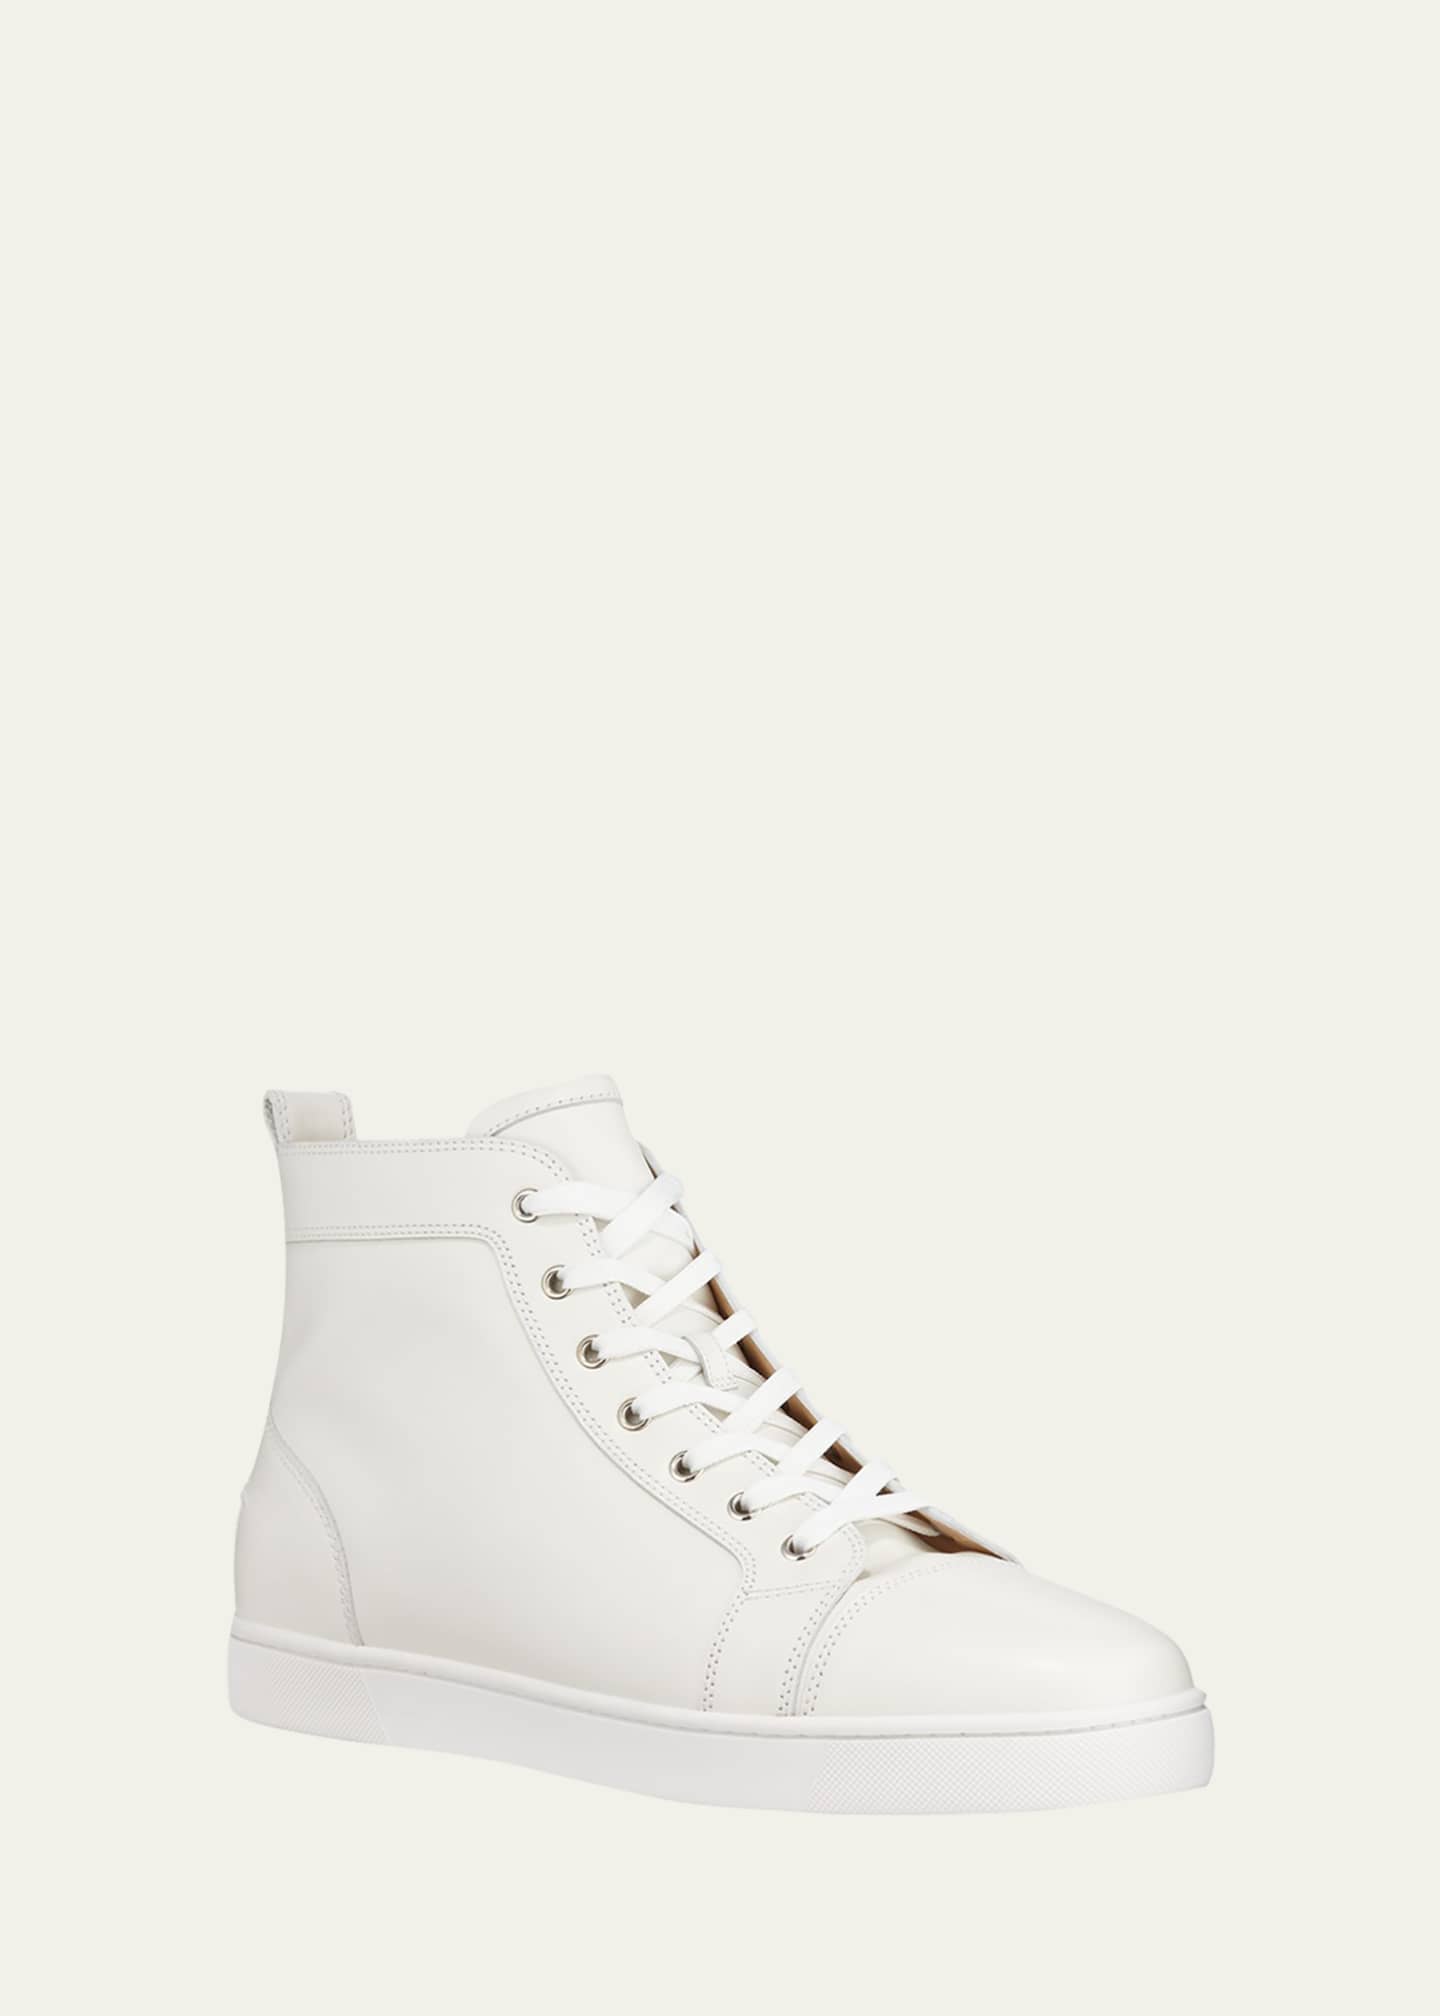 Christian Louboutin Men's Louis Leather High-Top Sneakers - Bergdorf ...